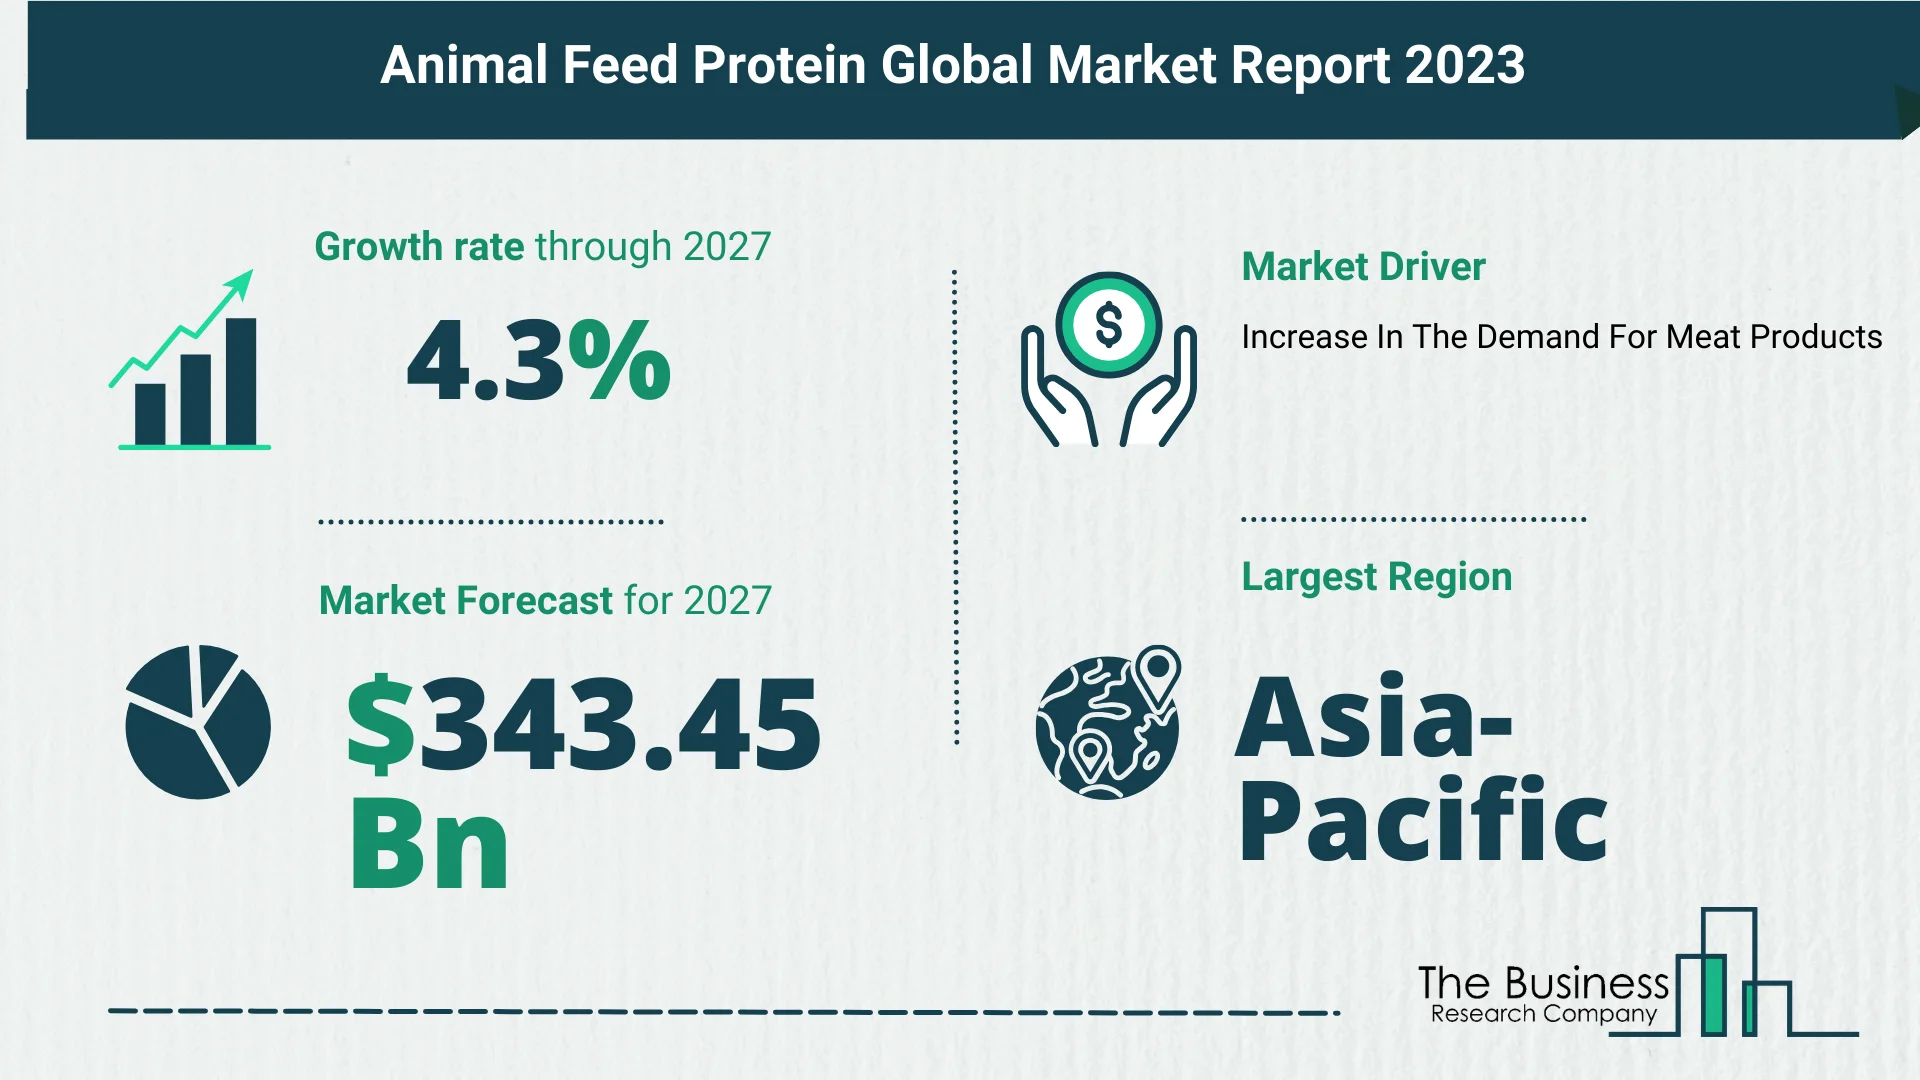 Key Trends And Drivers In The Animal Feed Protein Market 2023